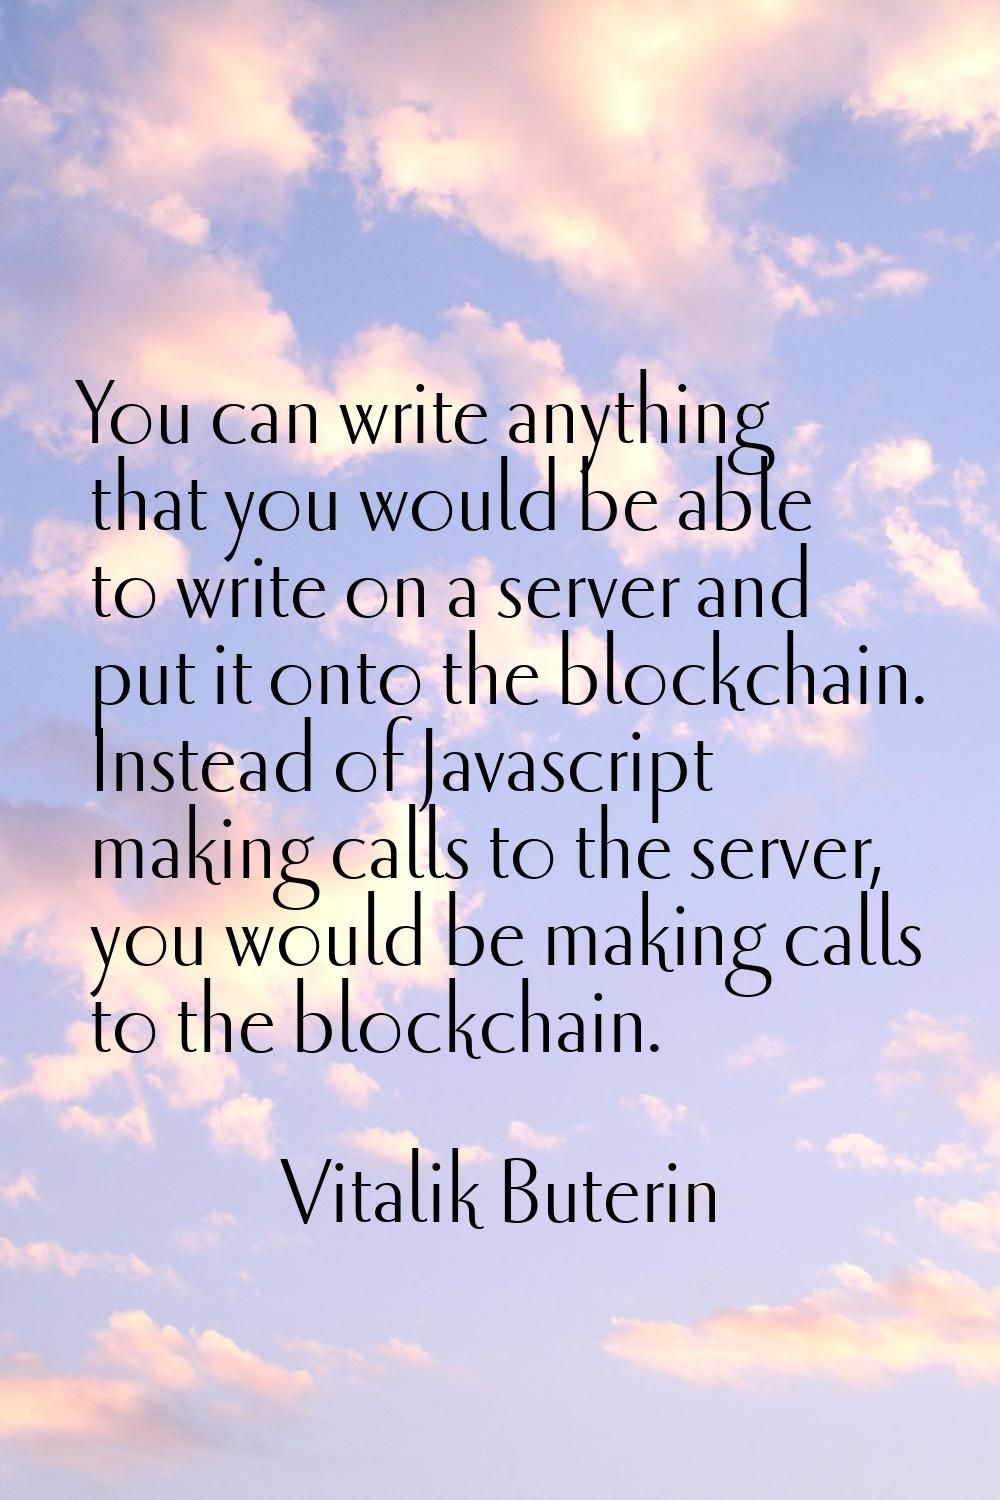 You can write anything that you would be able to write on a server and put it onto the blockchain. 